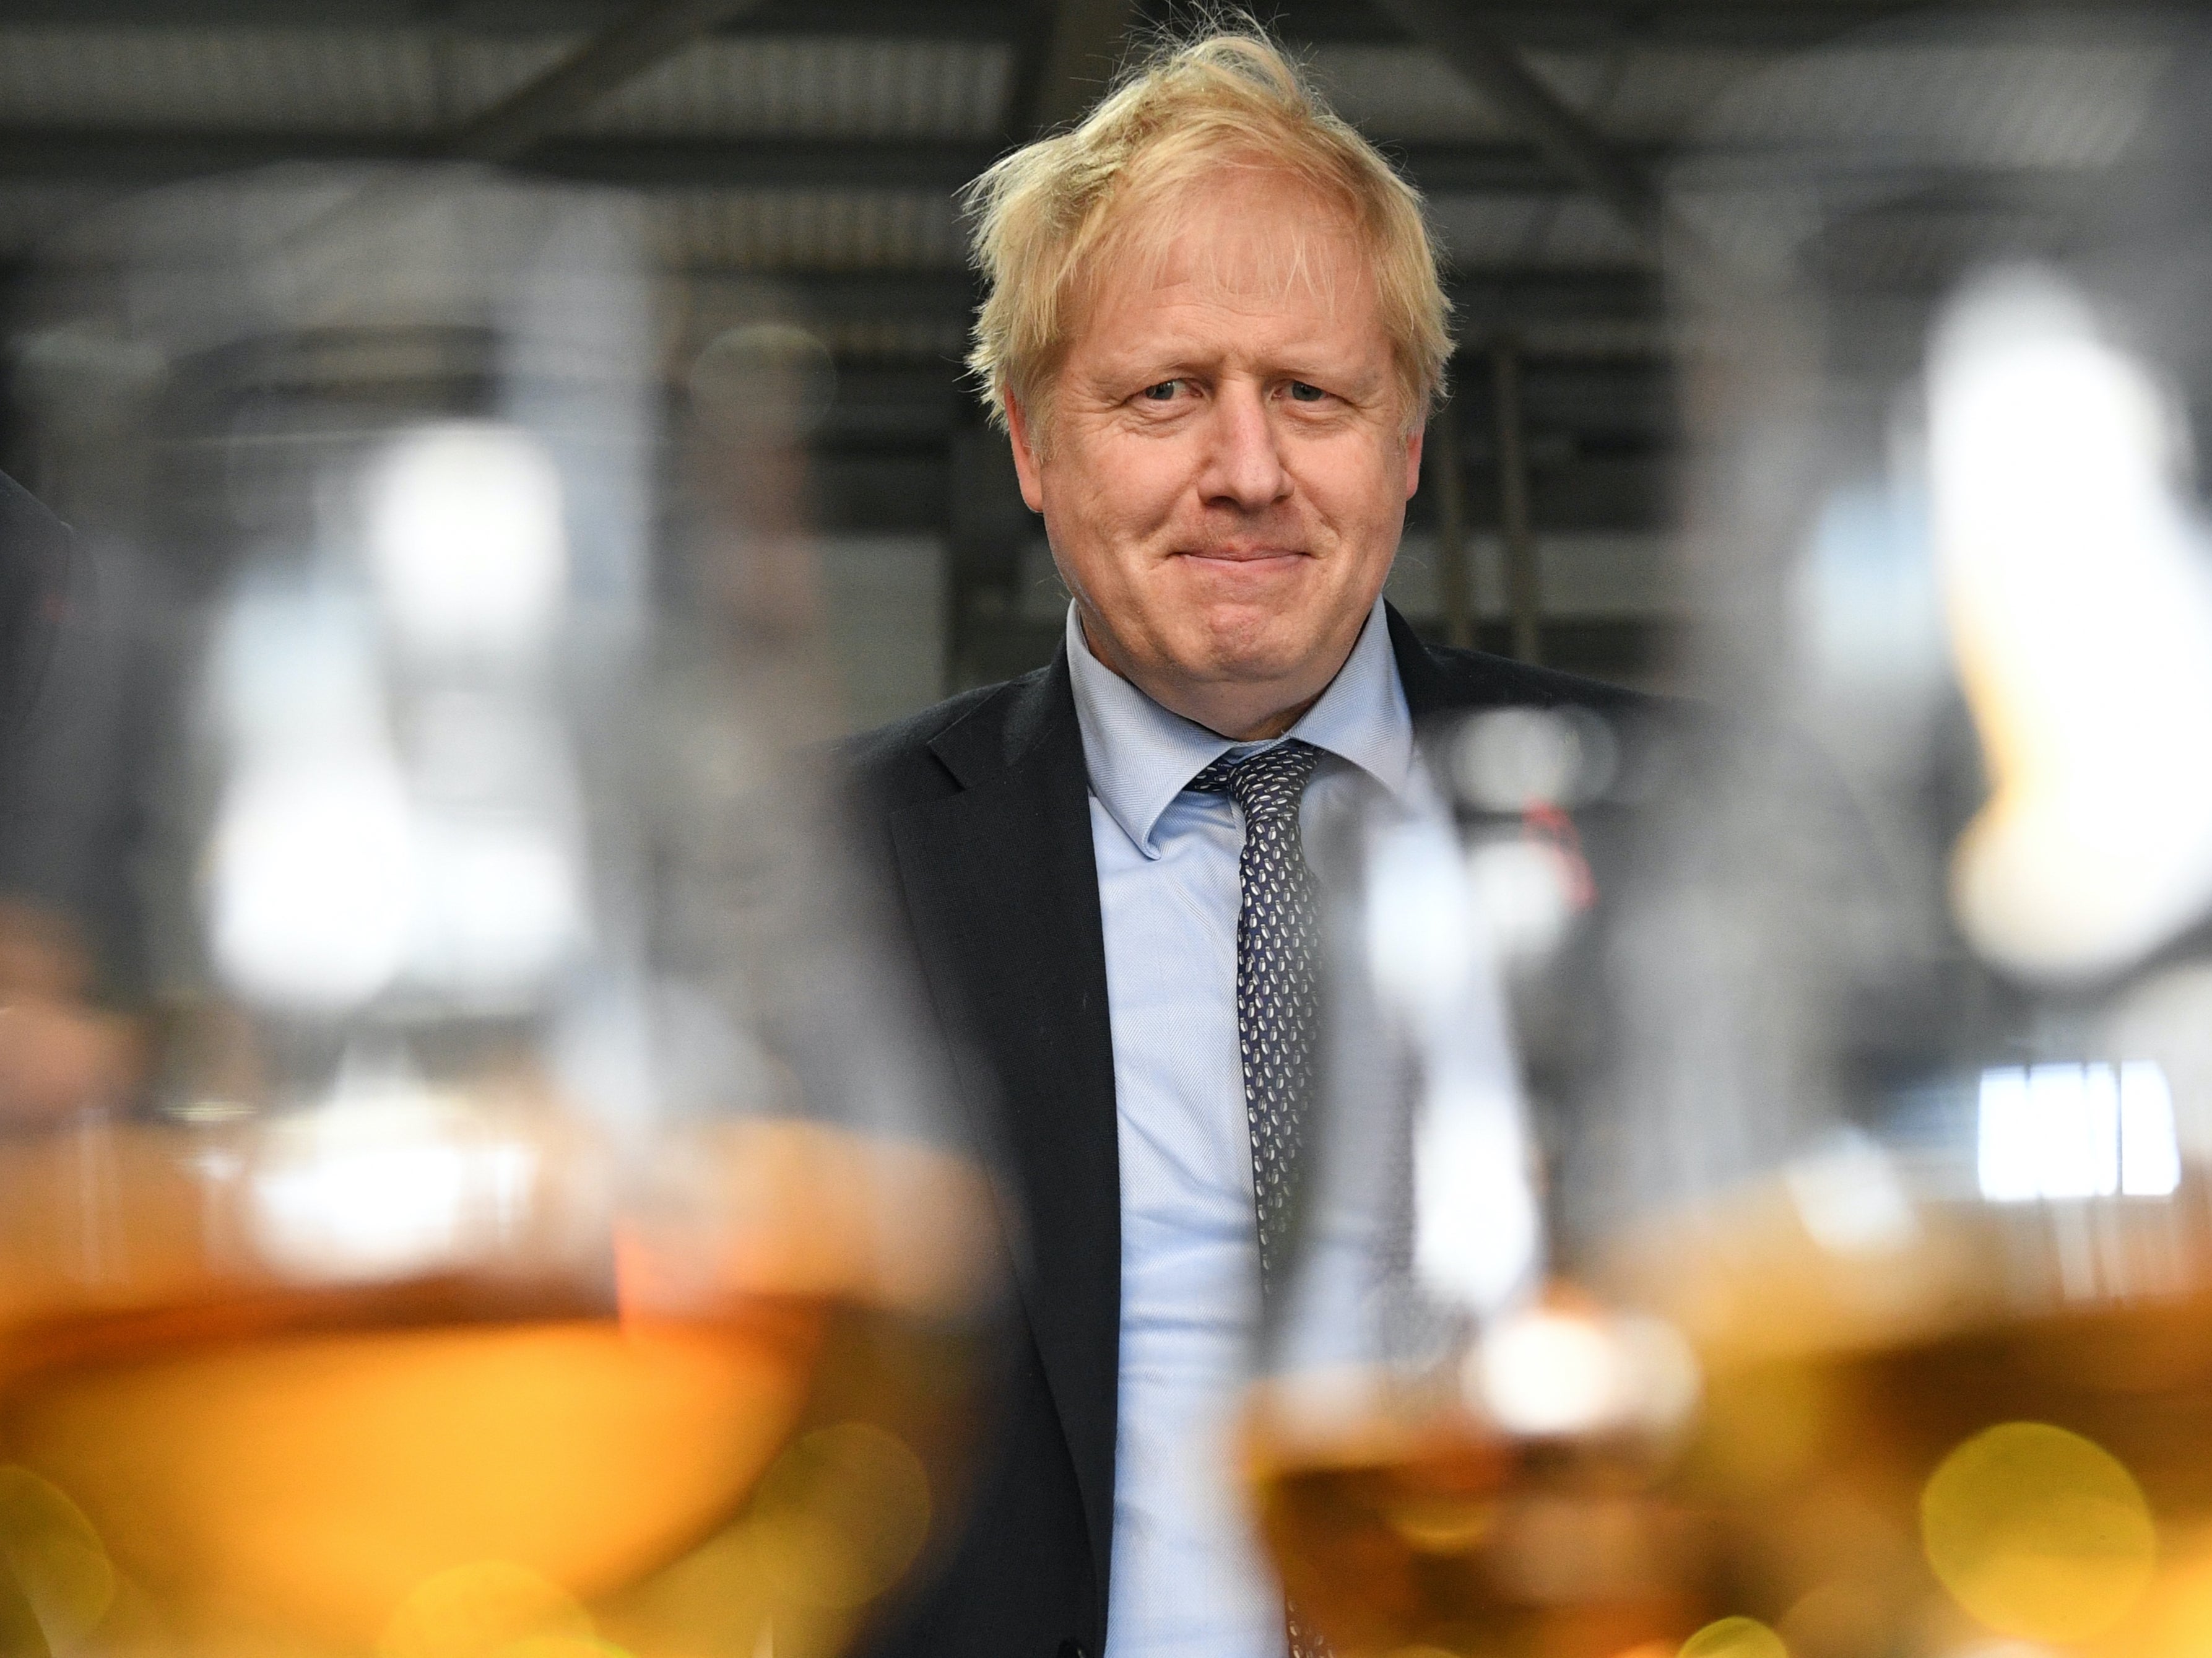 Boris Johnson in an upbeat mood at a whisky distillery today – but there are hard choices to come